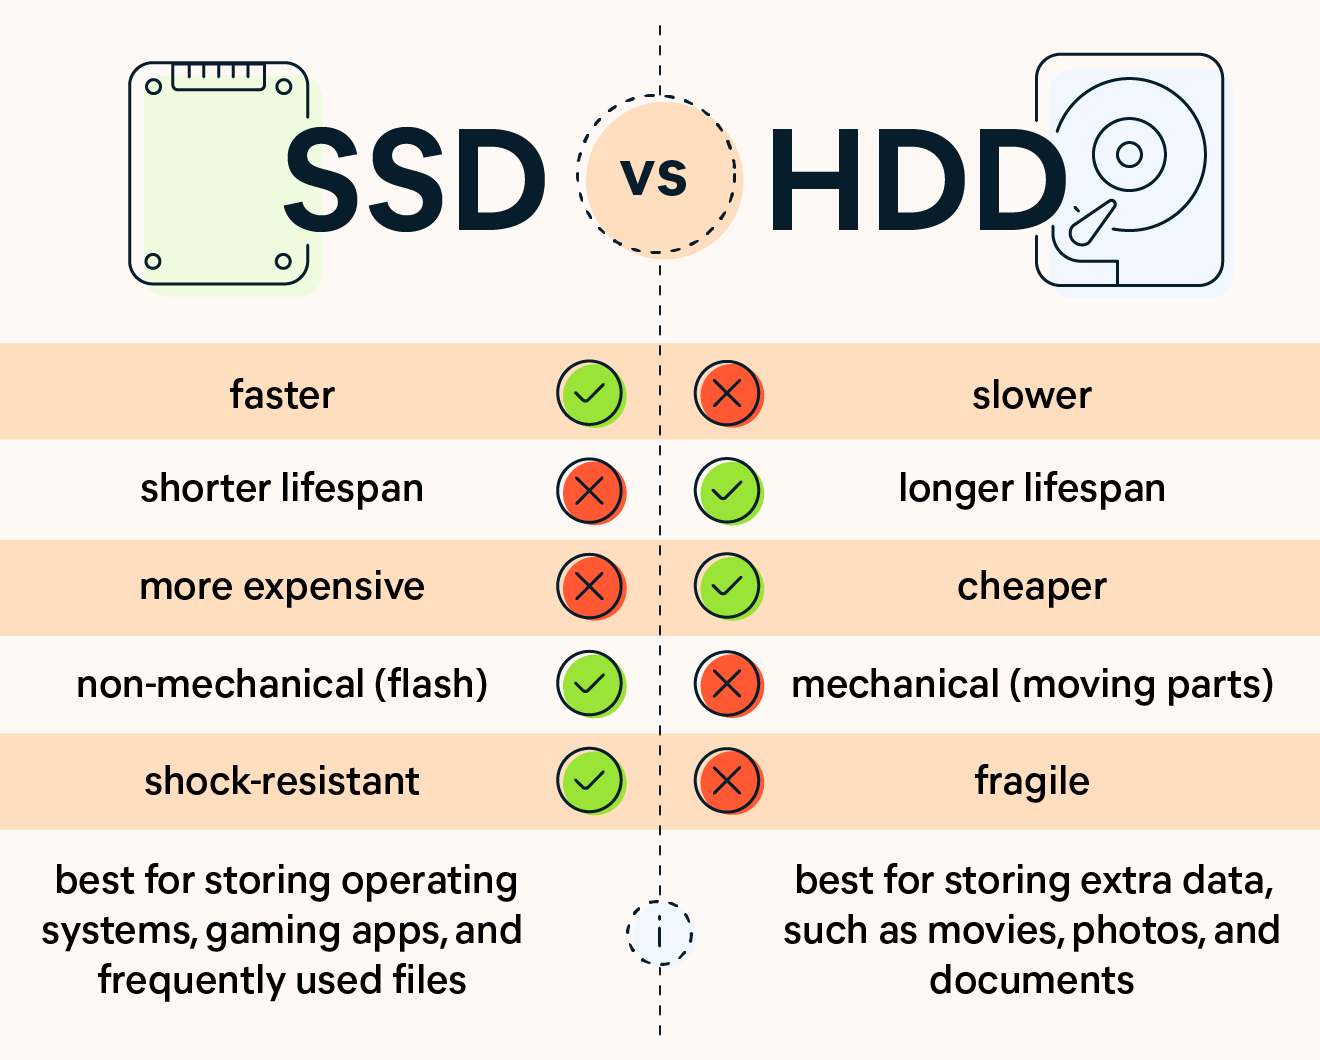 The differences between an SSD vs an HDD - SSDs are faster, while HDDs are cheaper and last longer.